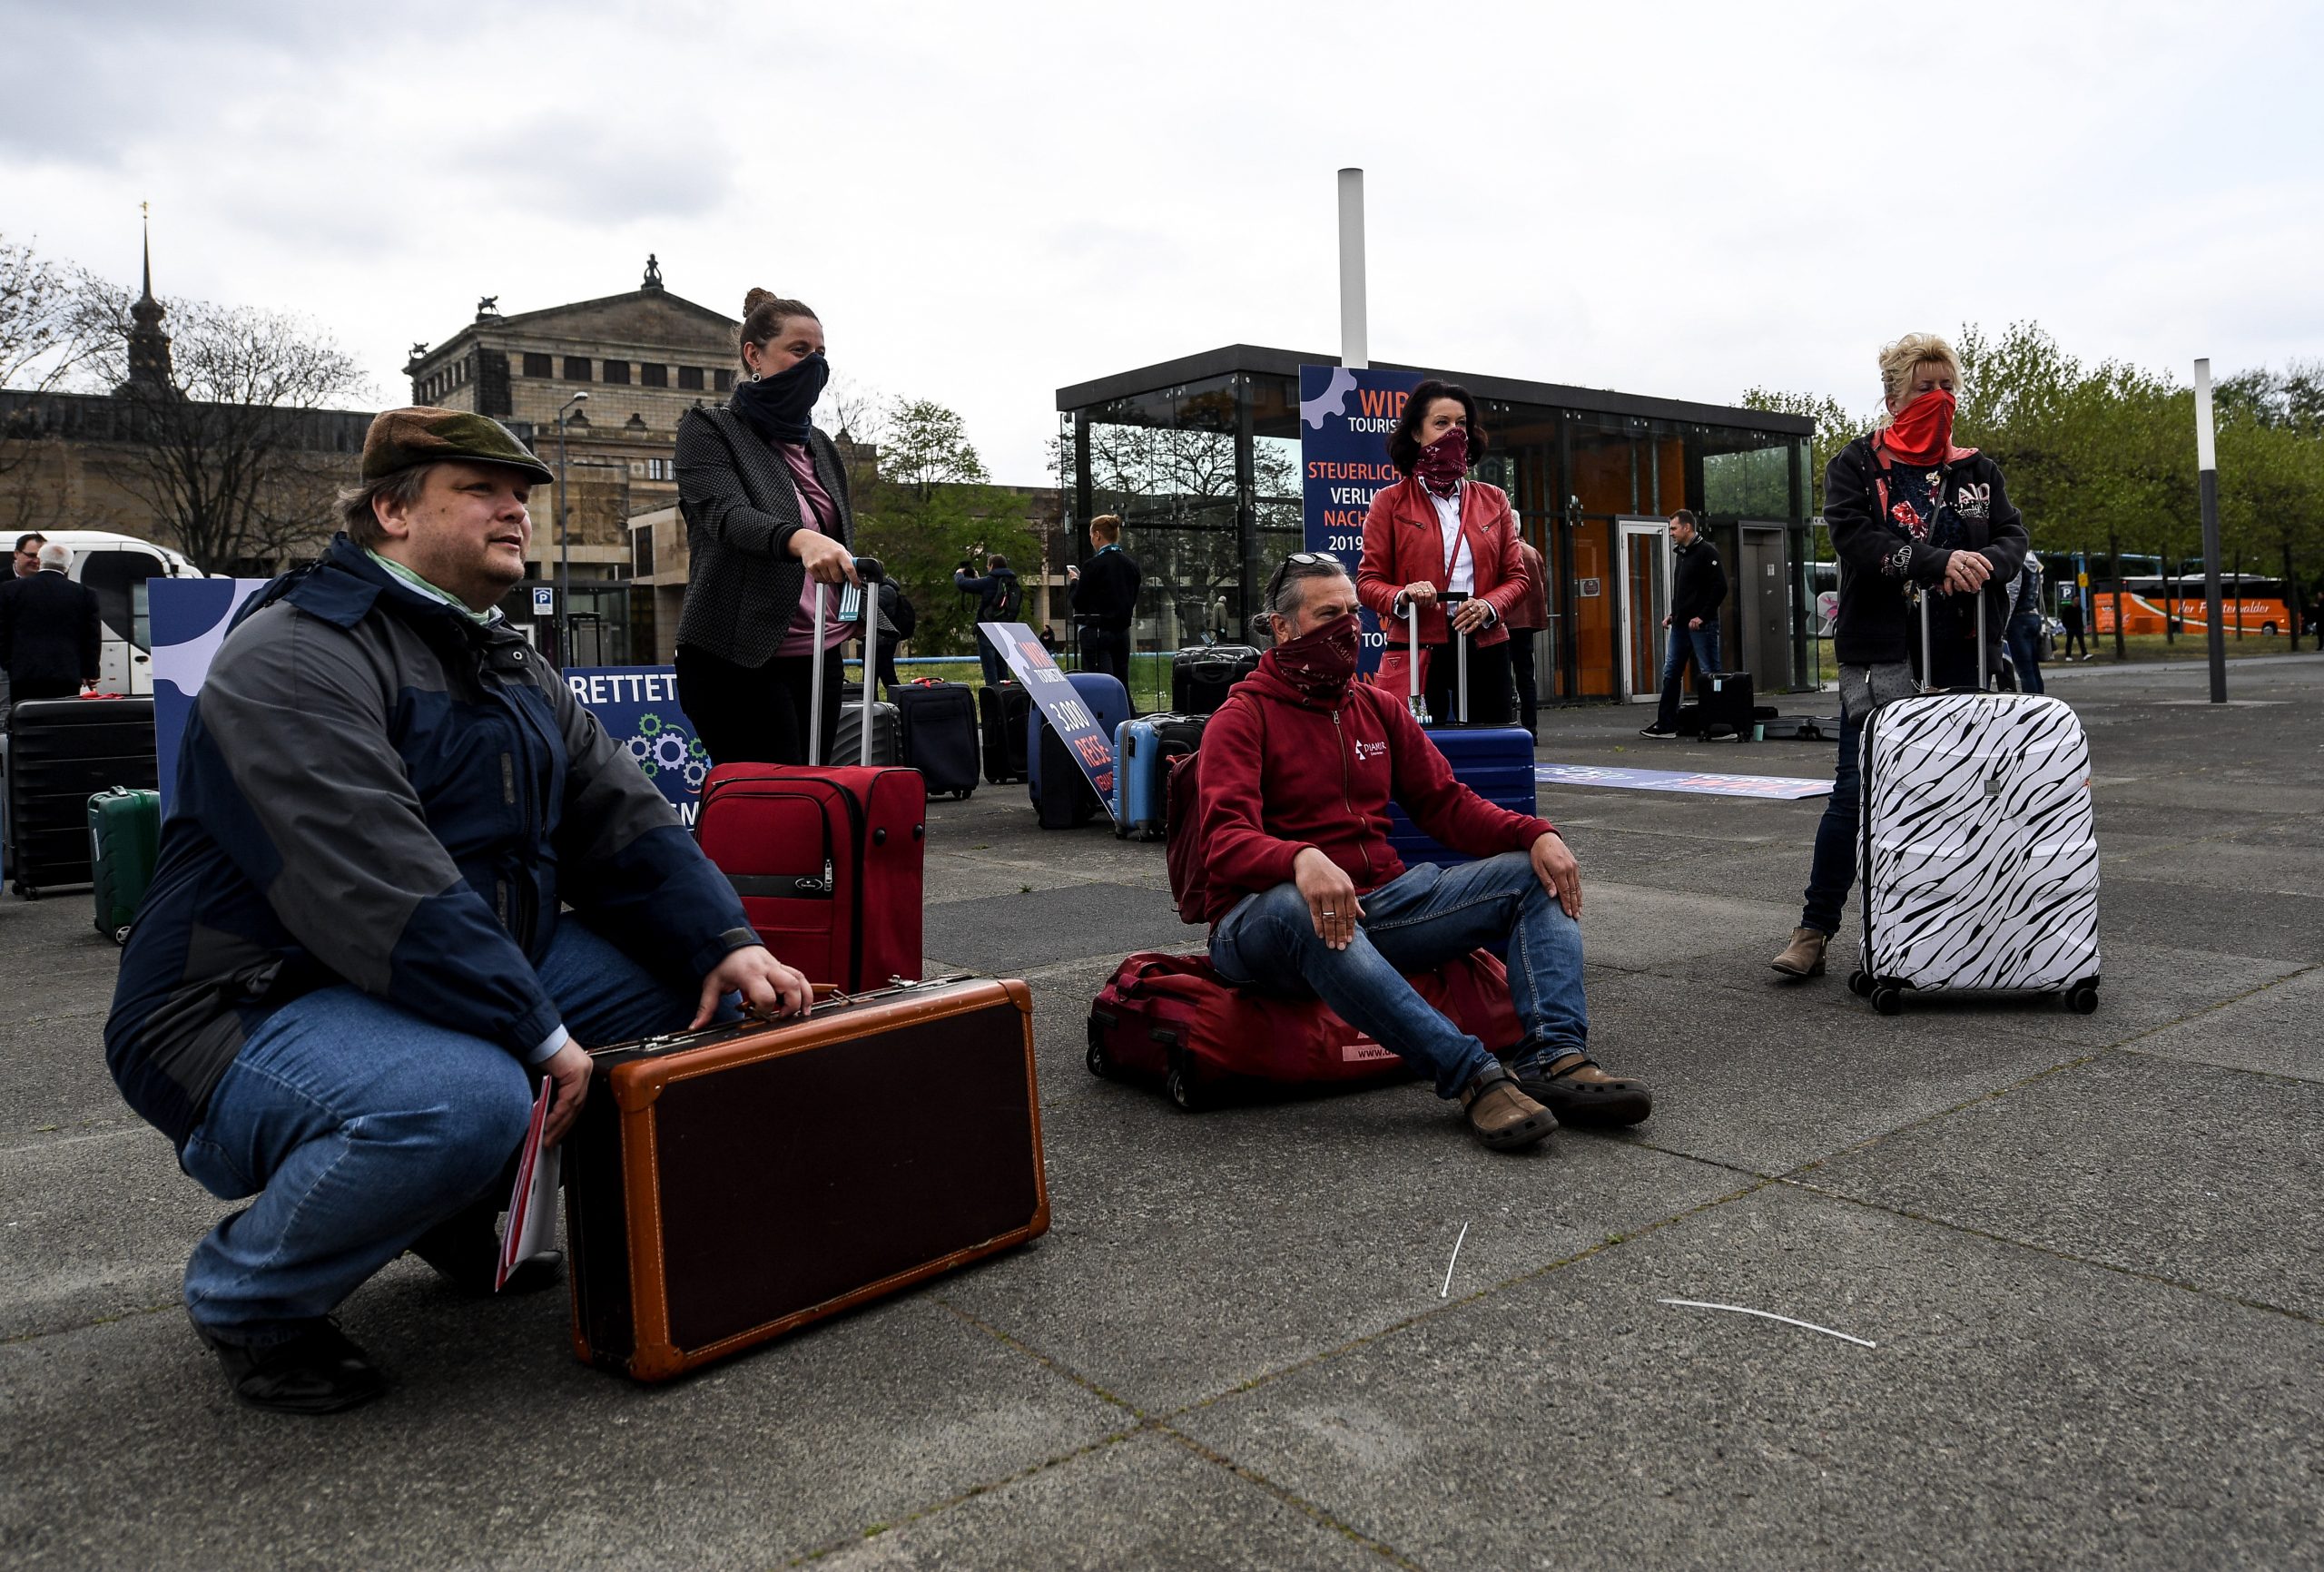 epa08391015 Protesters sit on luggage during a demonstration of travel agencies employees in Dresden, Germany, 29 April 2020. Some of Saxony's travel agencies workers blocked Dresden streets with tour buses to draw attention to the difficult economic situation of the tourism industry during the coronavirus pandemic.  EPA/FILIP SINGER